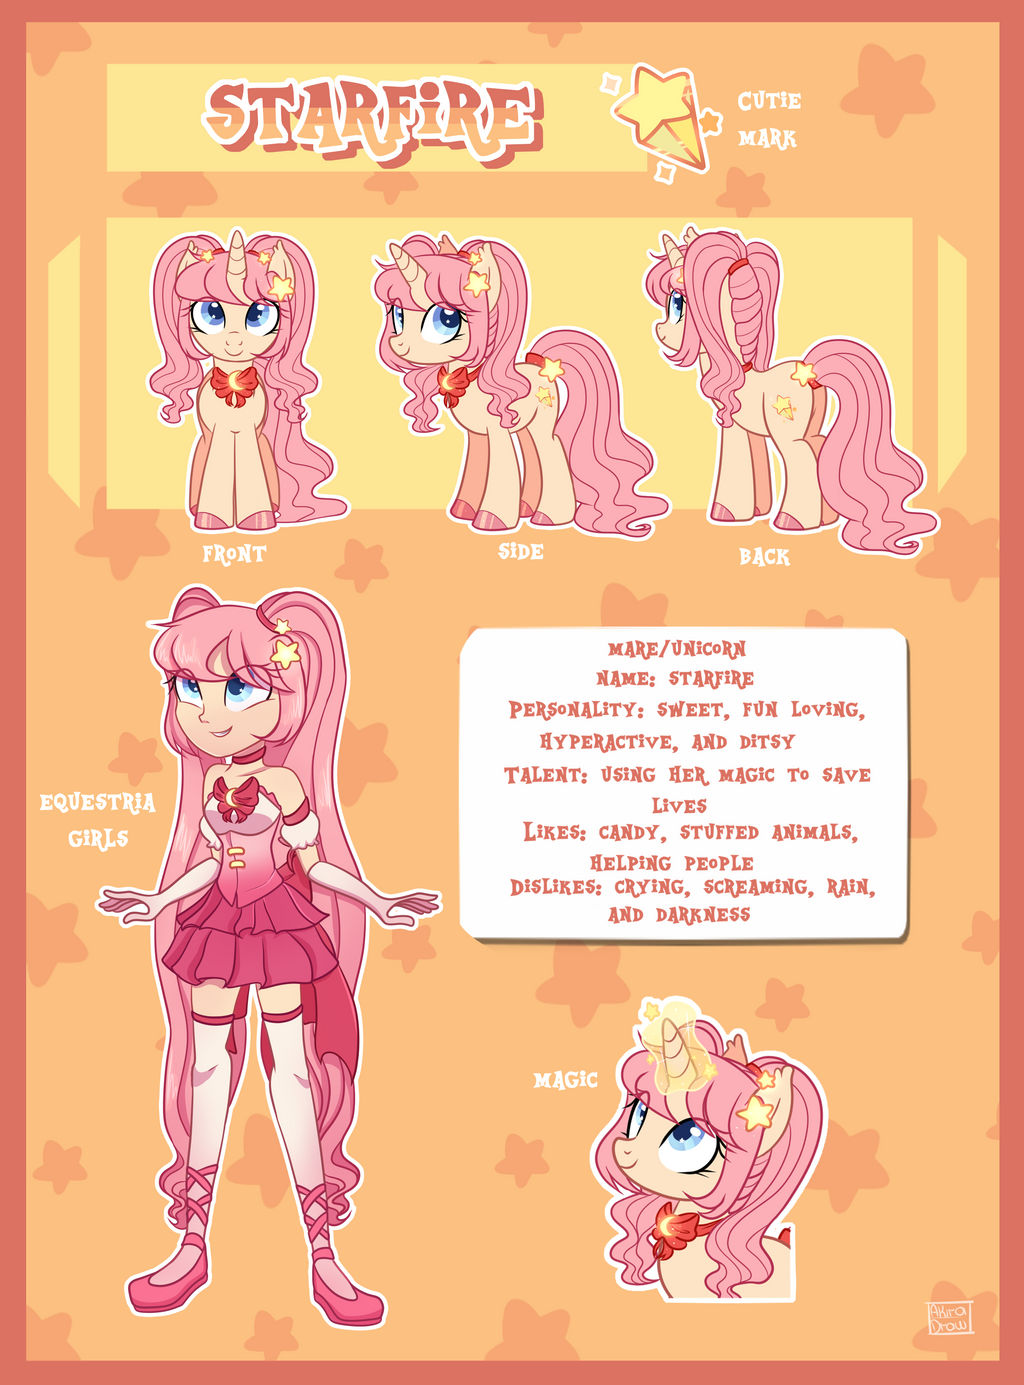 Eggs from QSMP - Redesign pt1 by LUUXIFER on DeviantArt